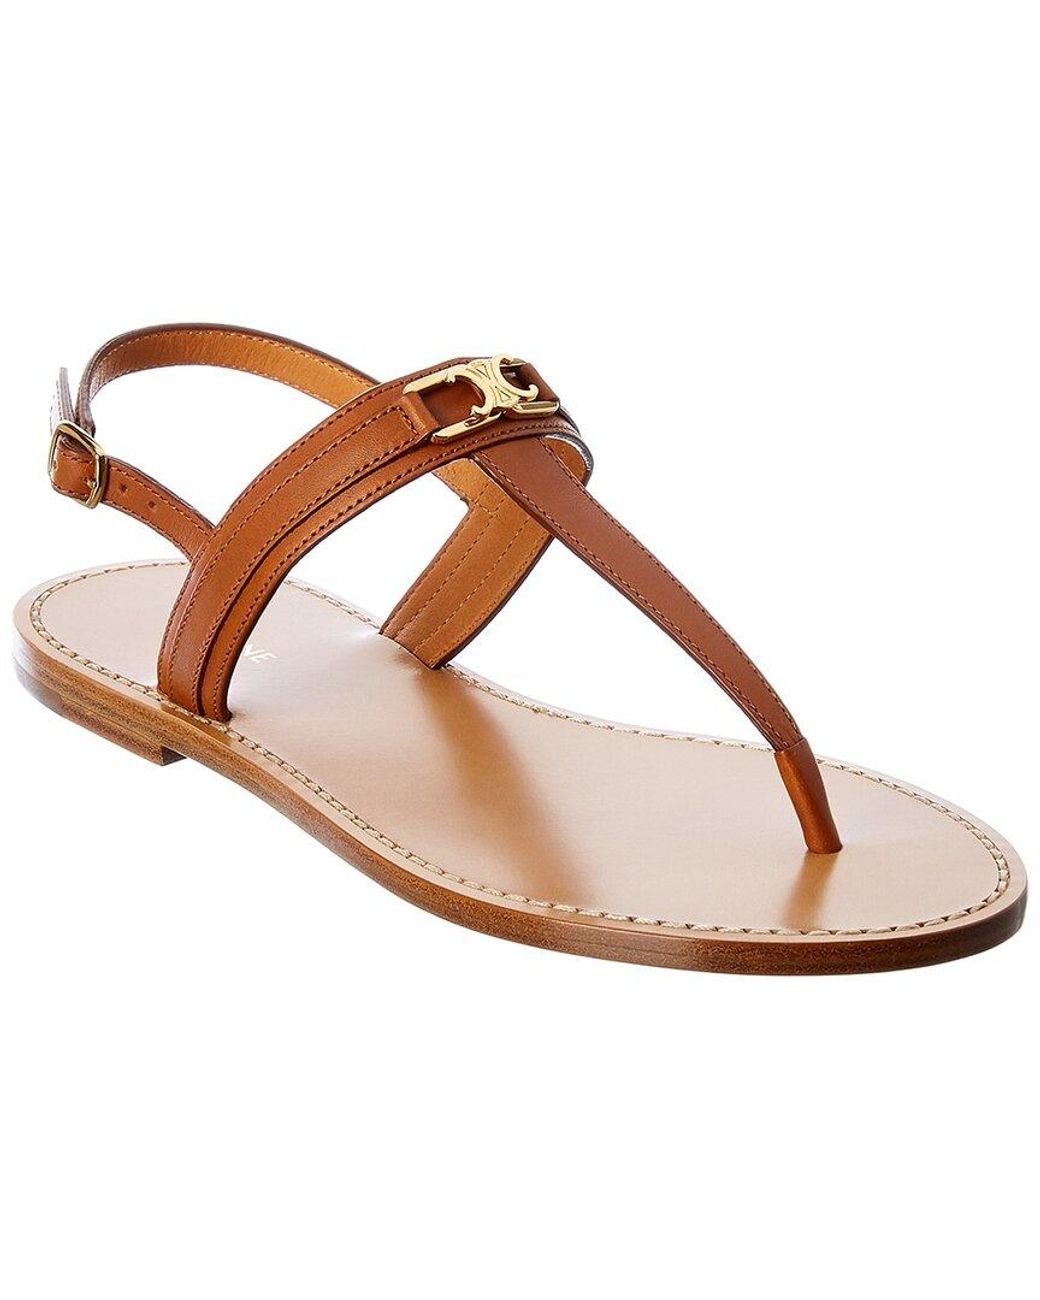 Celine Triomphe Leather Sandal in Brown - Lyst